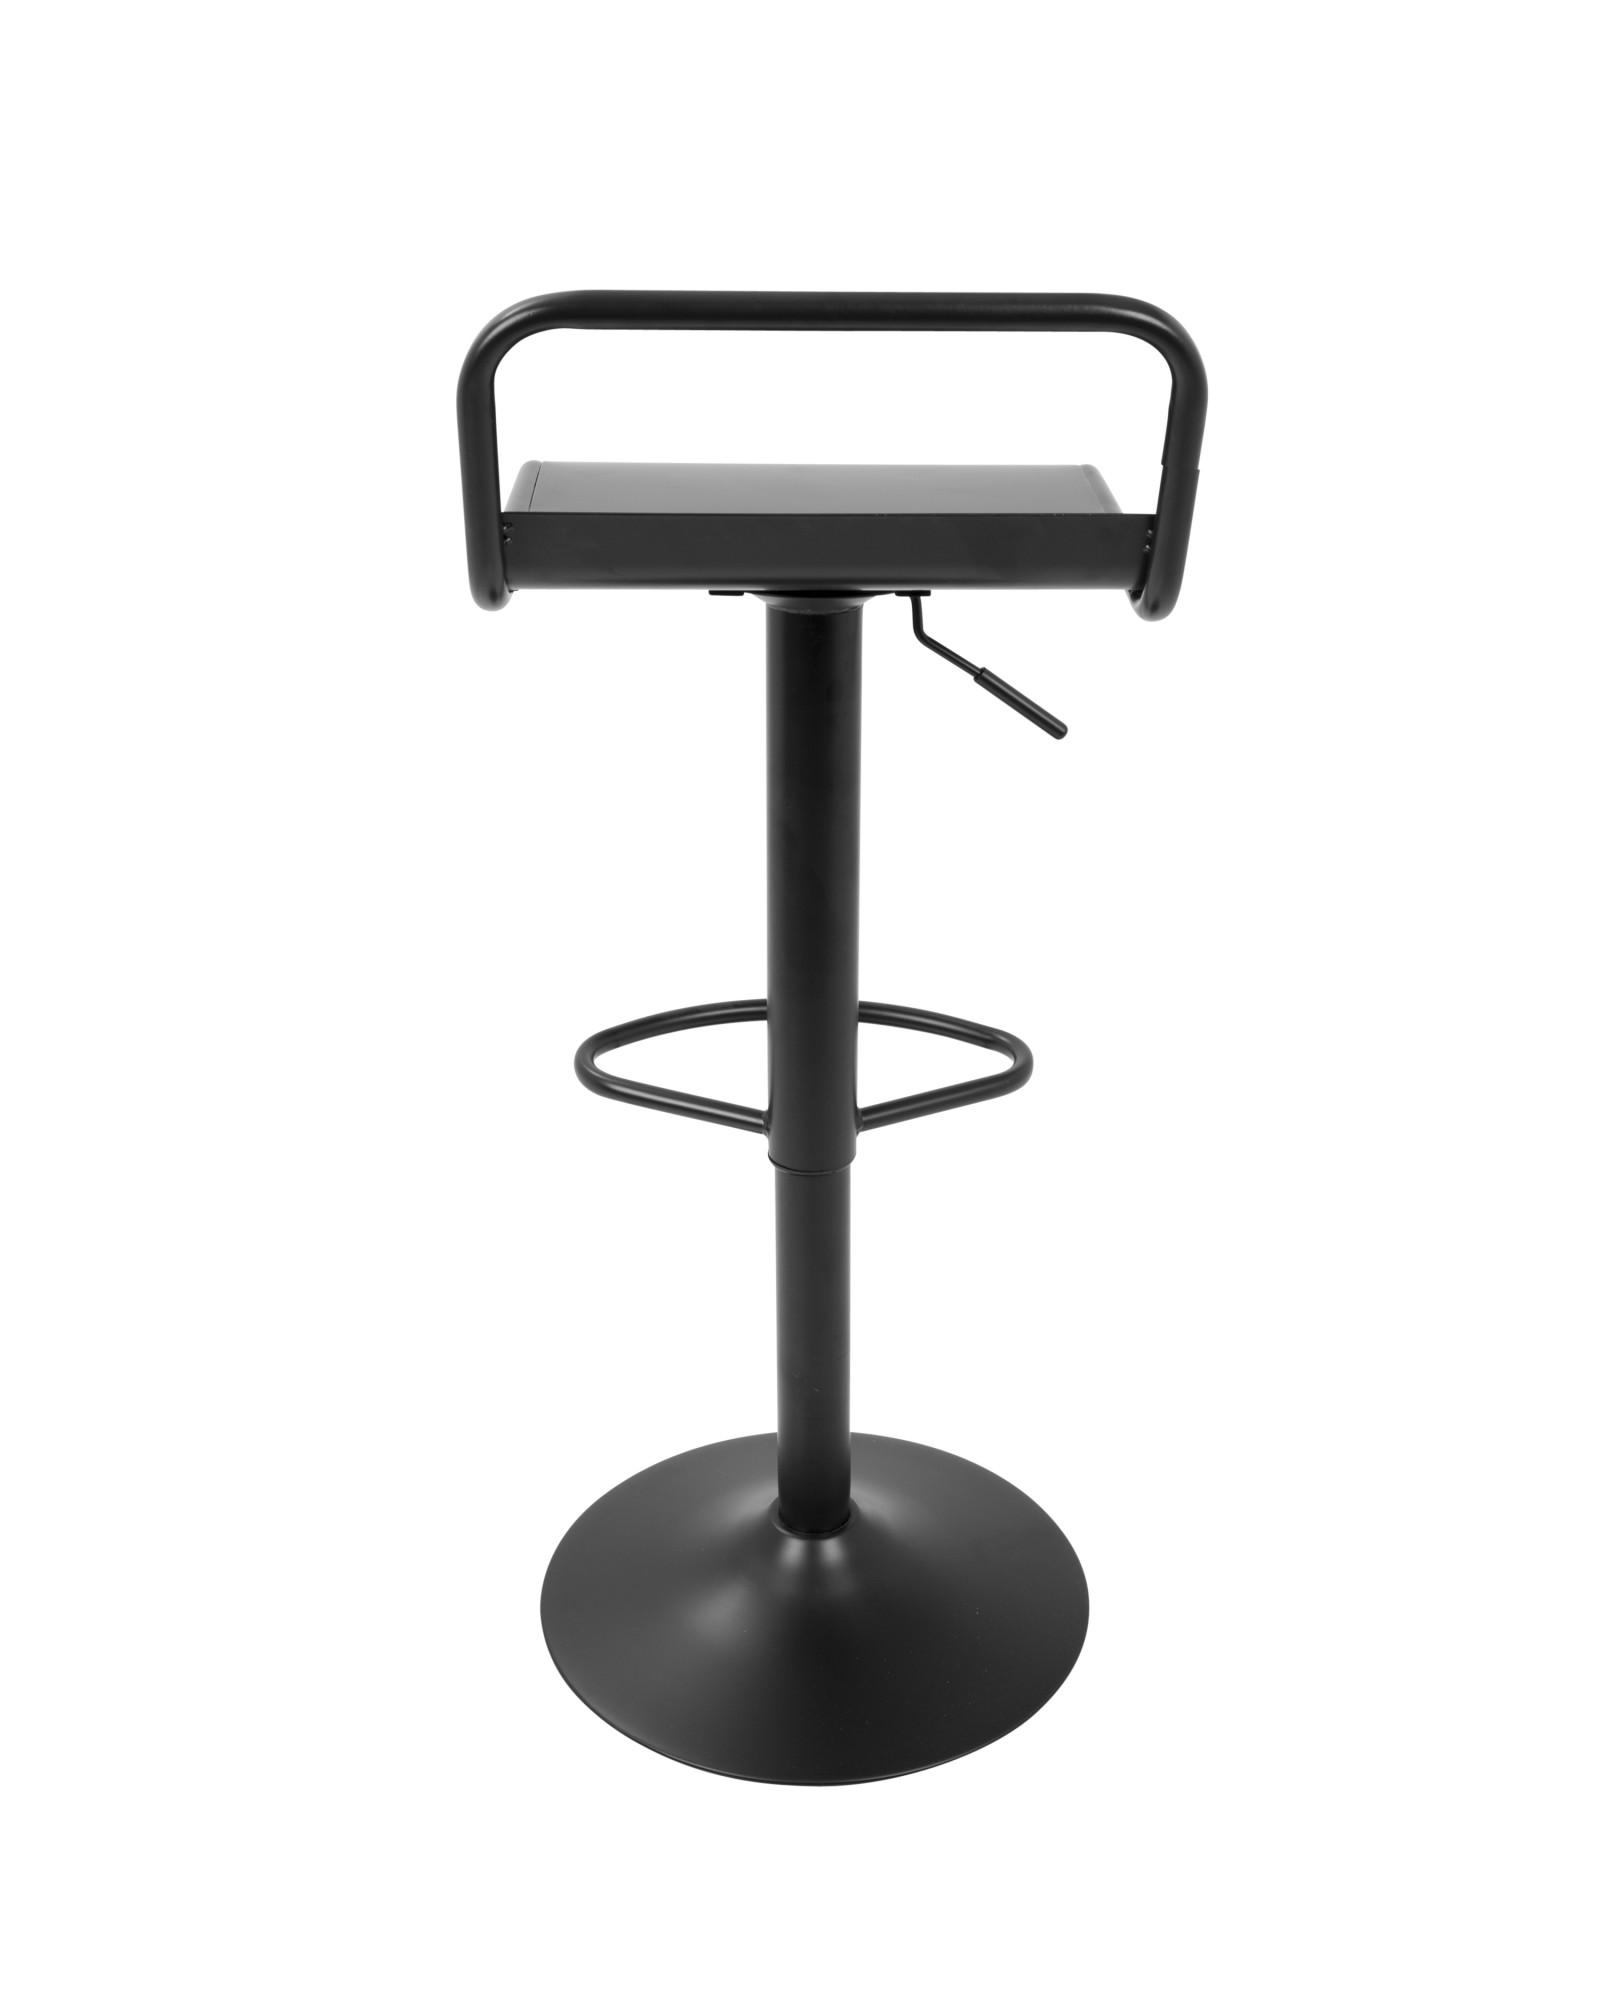 Emery Industrial Adjustable Barstool with Swivel in Black - Set of 2